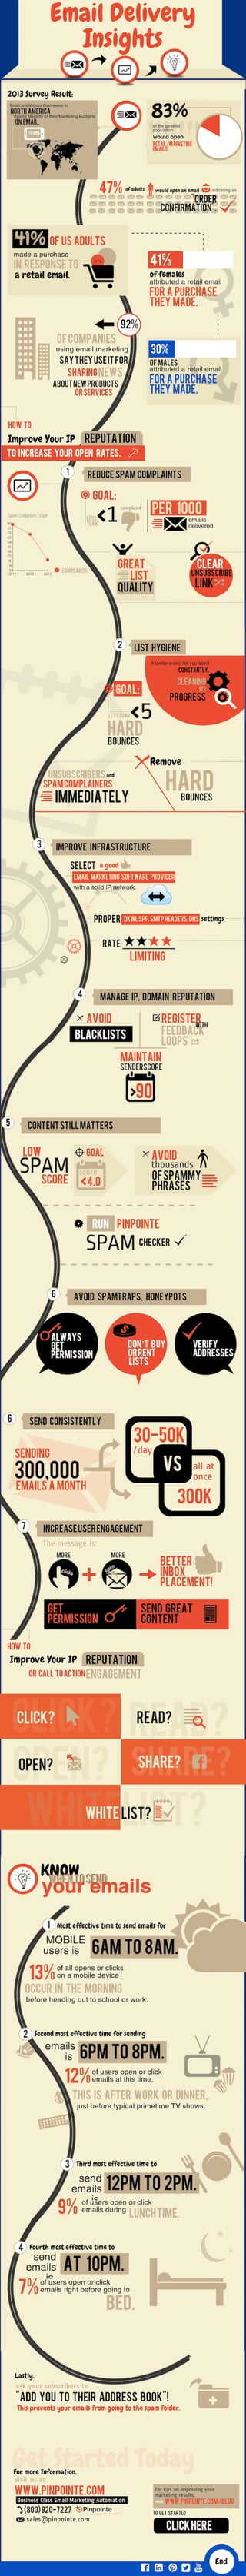 Infographic: Email Delivery Insights